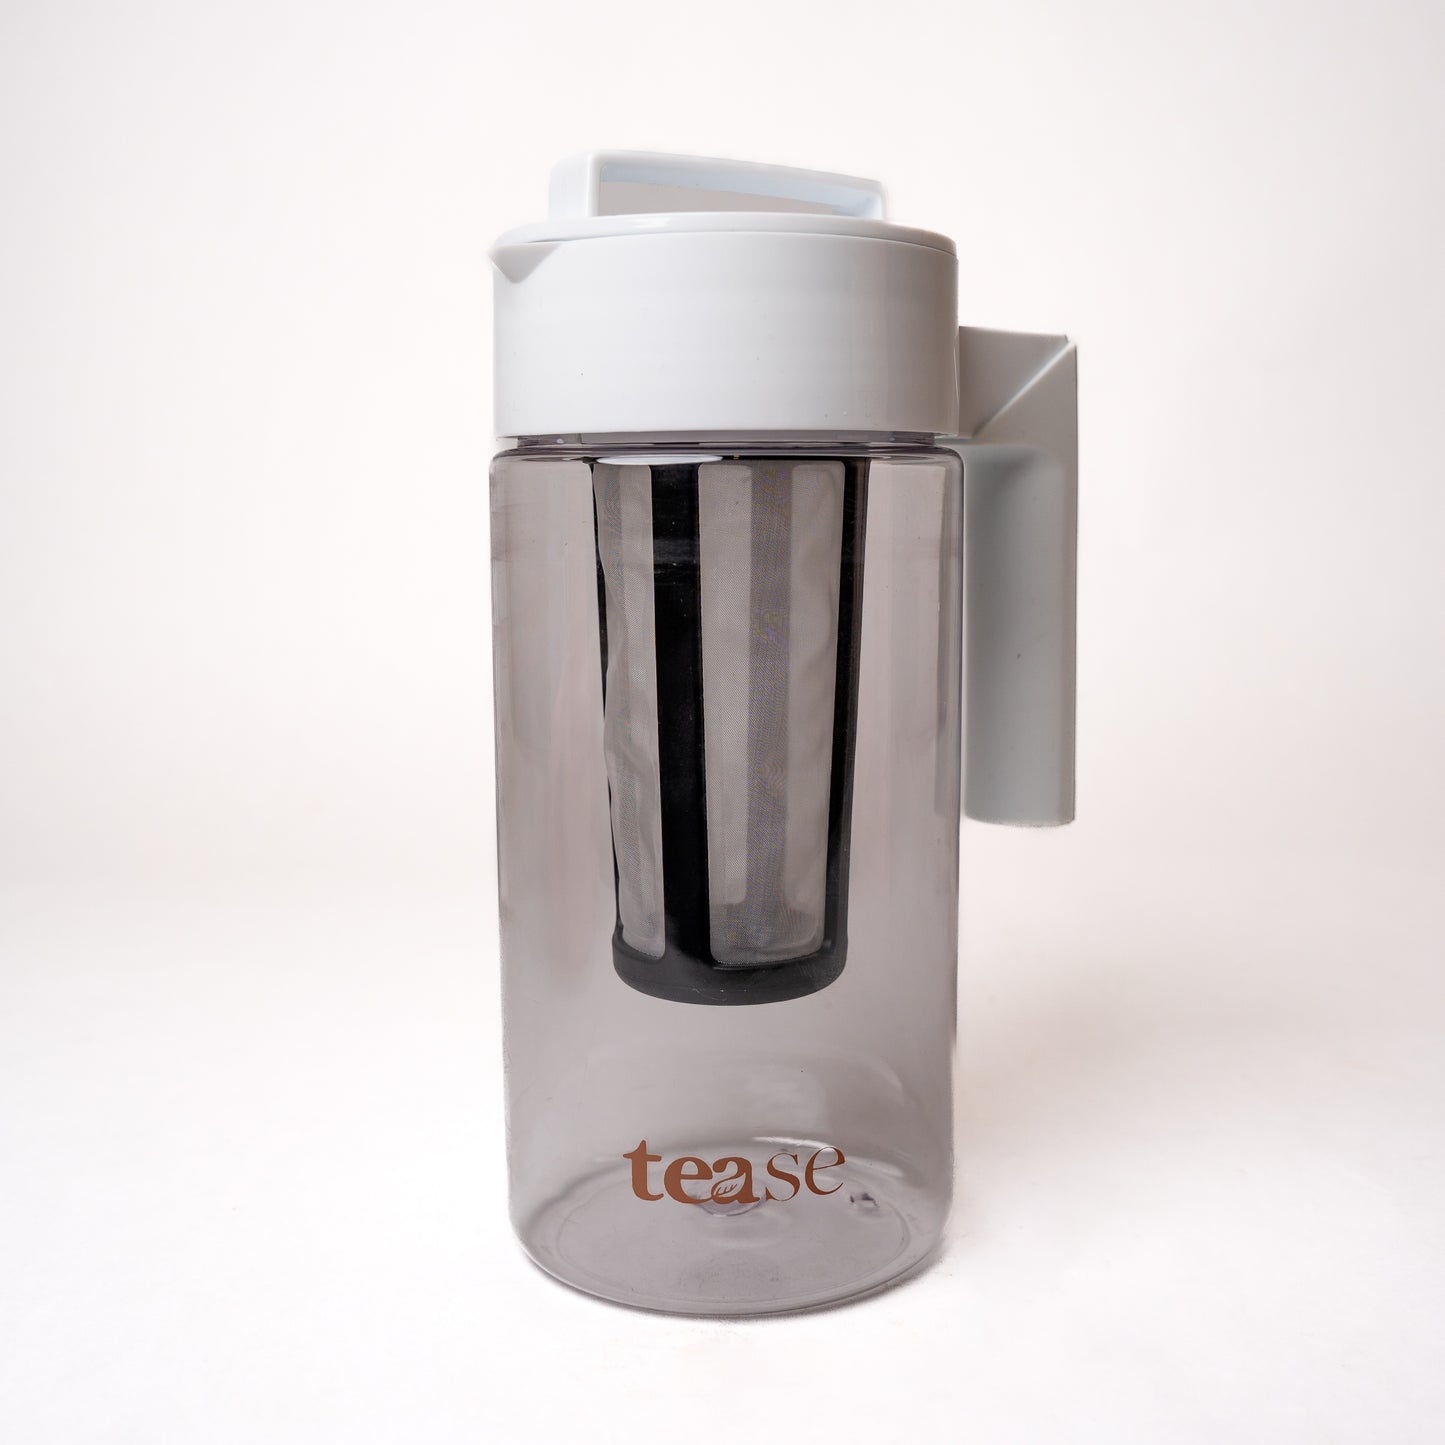 3-In-1 Cold Brew Tea & Coffee Maker, Pitcher